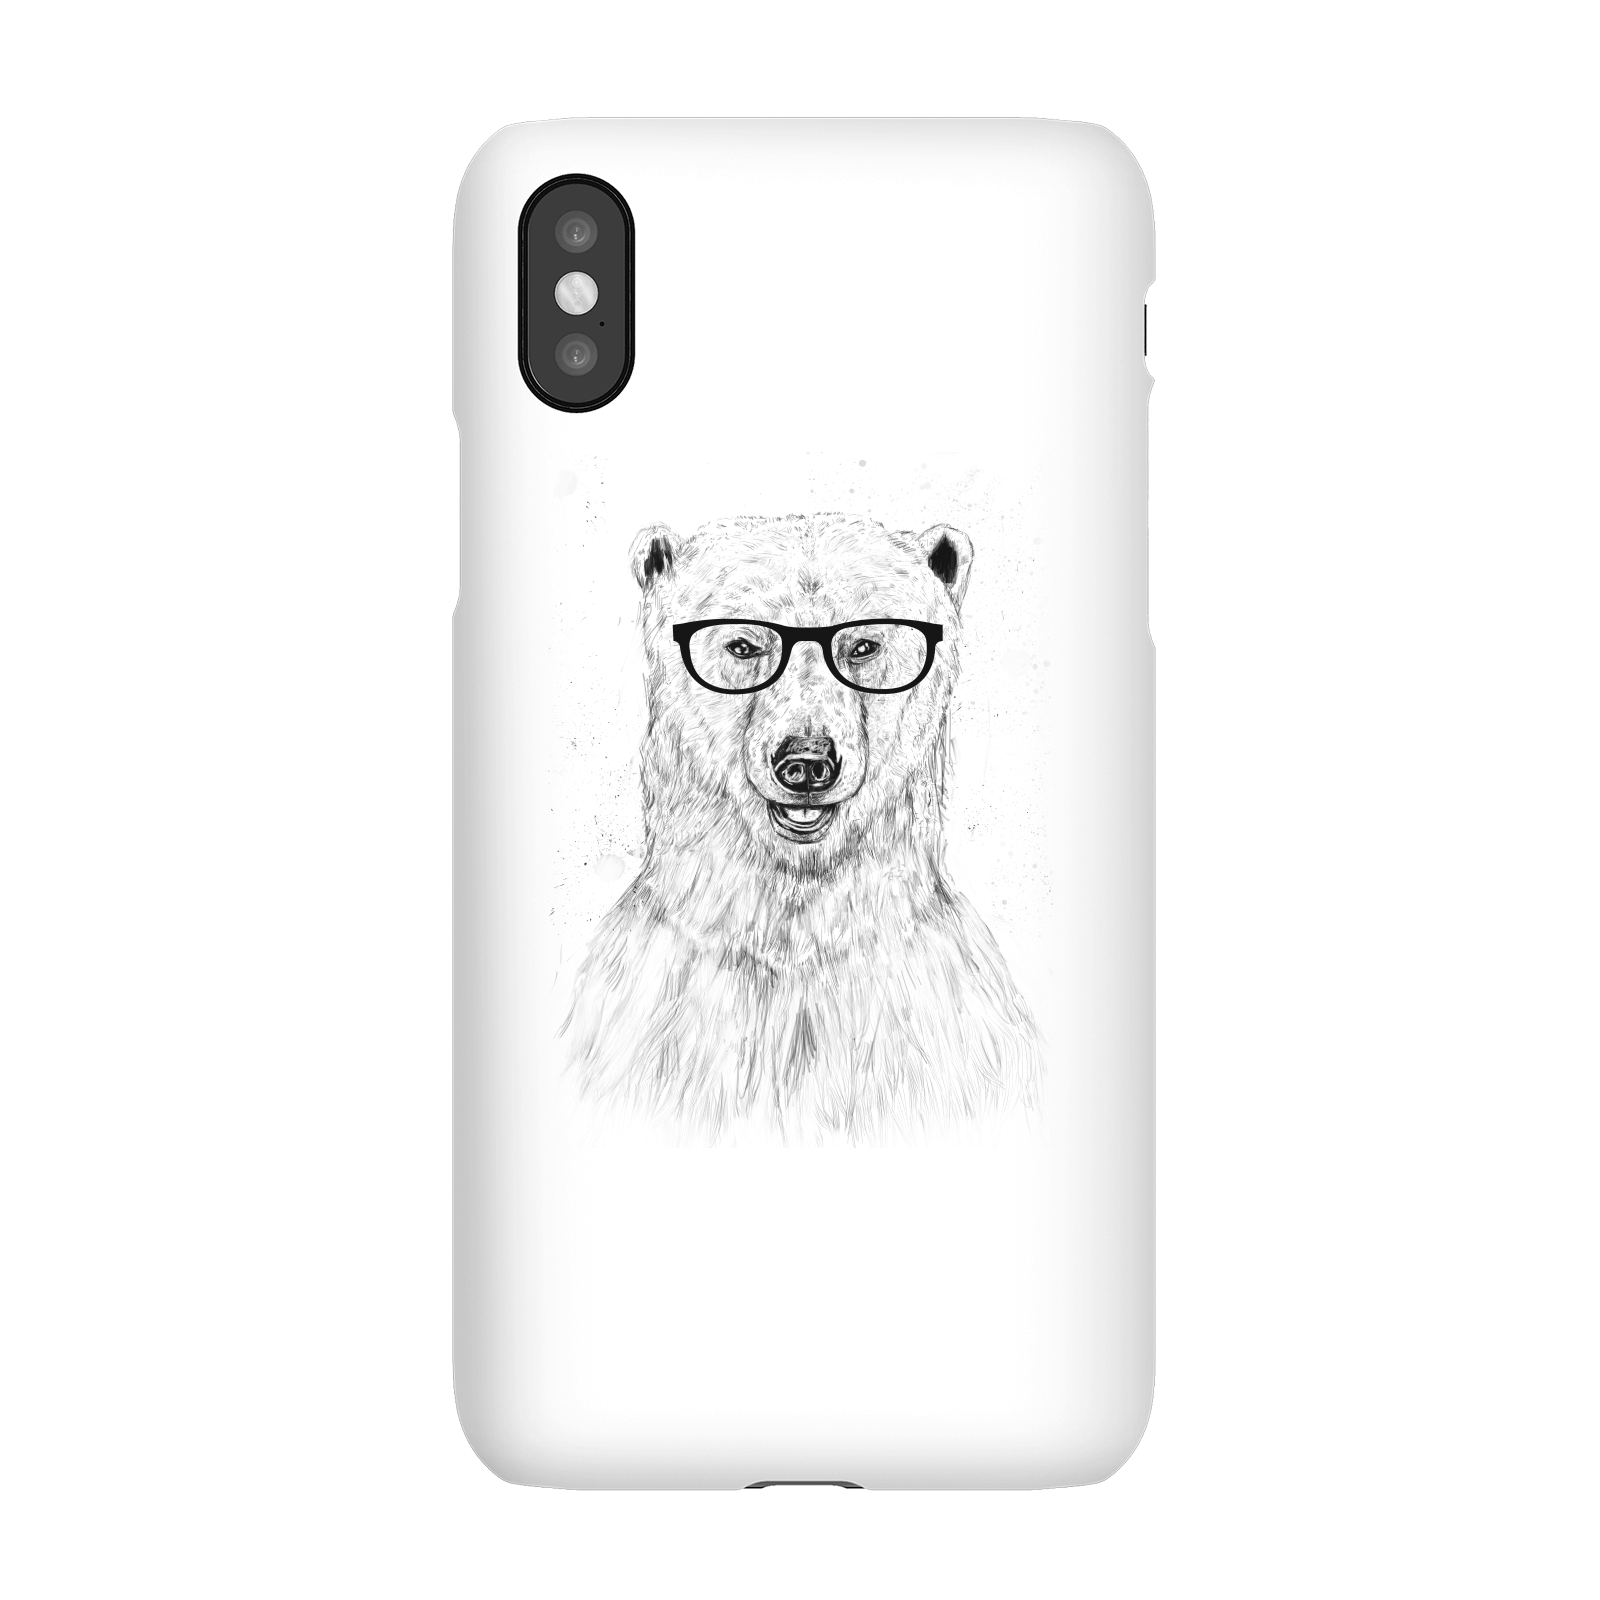 Balazs Solti Polar Bear And Glasses Phone Case for iPhone and Android - iPhone 11 Pro Max - Snap Case - Matte